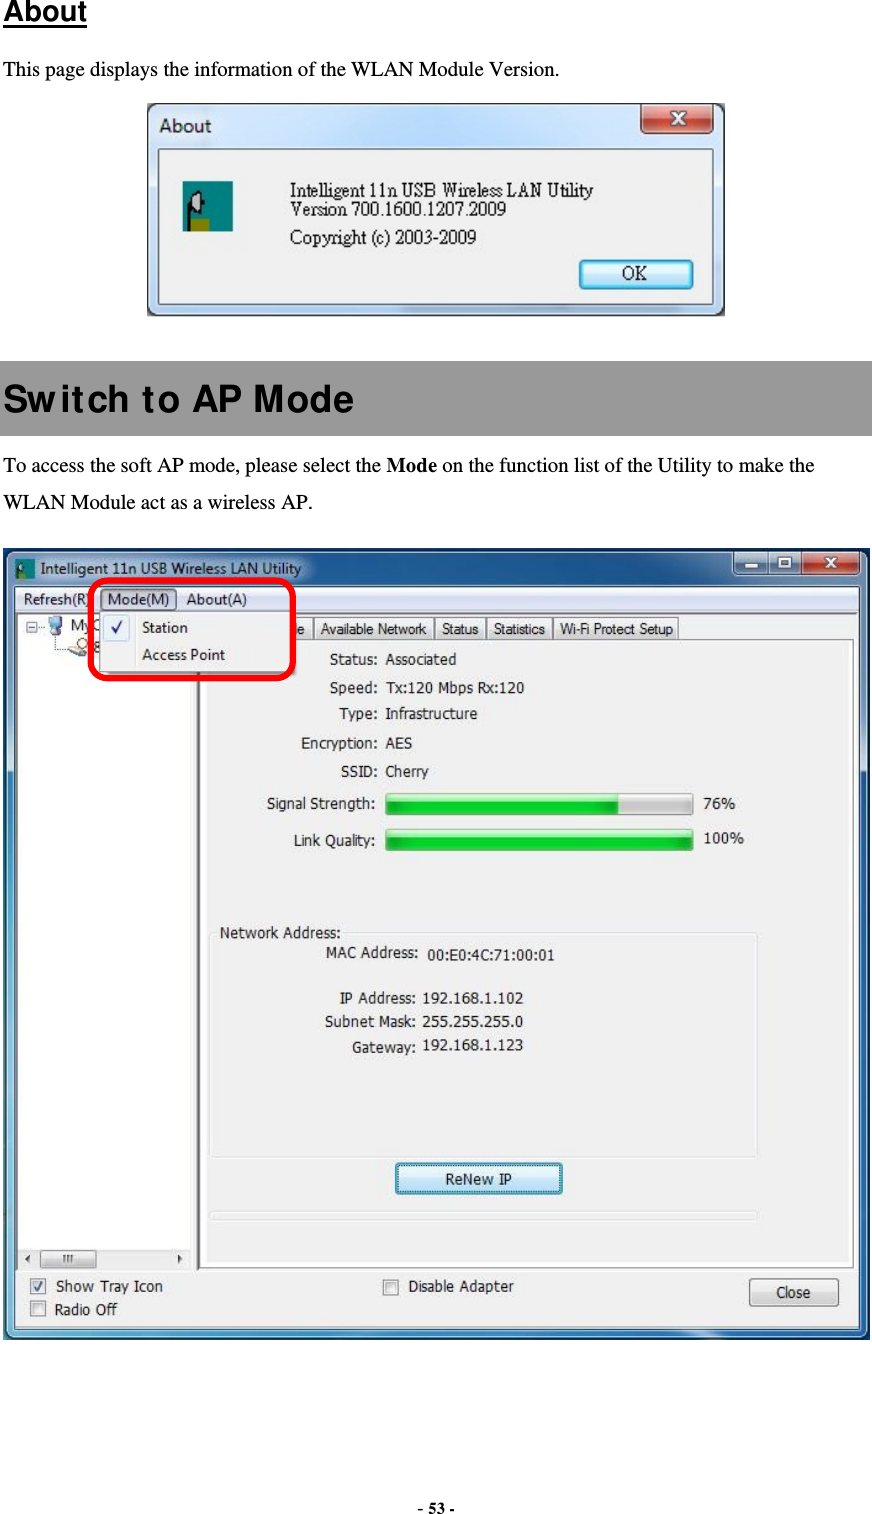  - 53 -  About This page displays the information of the WLAN Module Version.   Switch to AP Mode To access the soft AP mode, please select the Mode on the function list of the Utility to make the WLAN Module act as a wireless AP.   